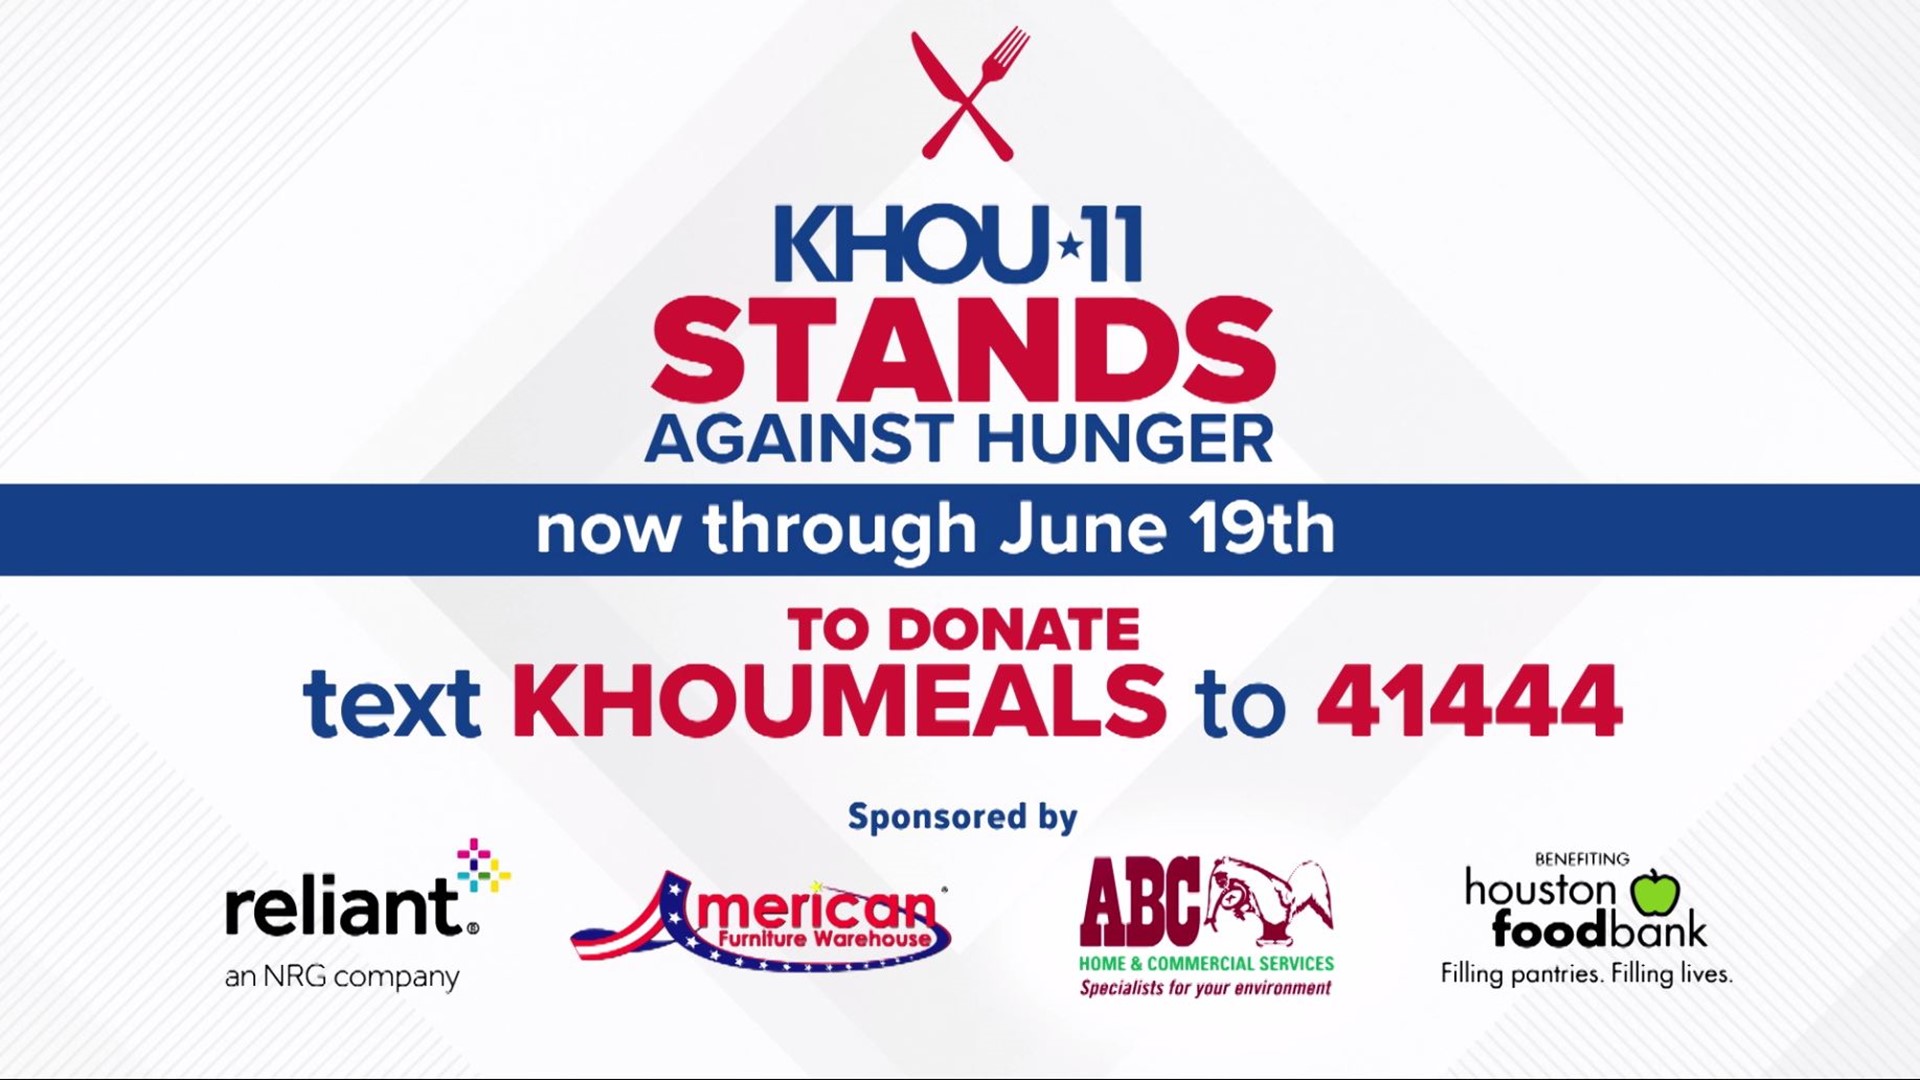 To donate, text KHOUMEALS to 41444.